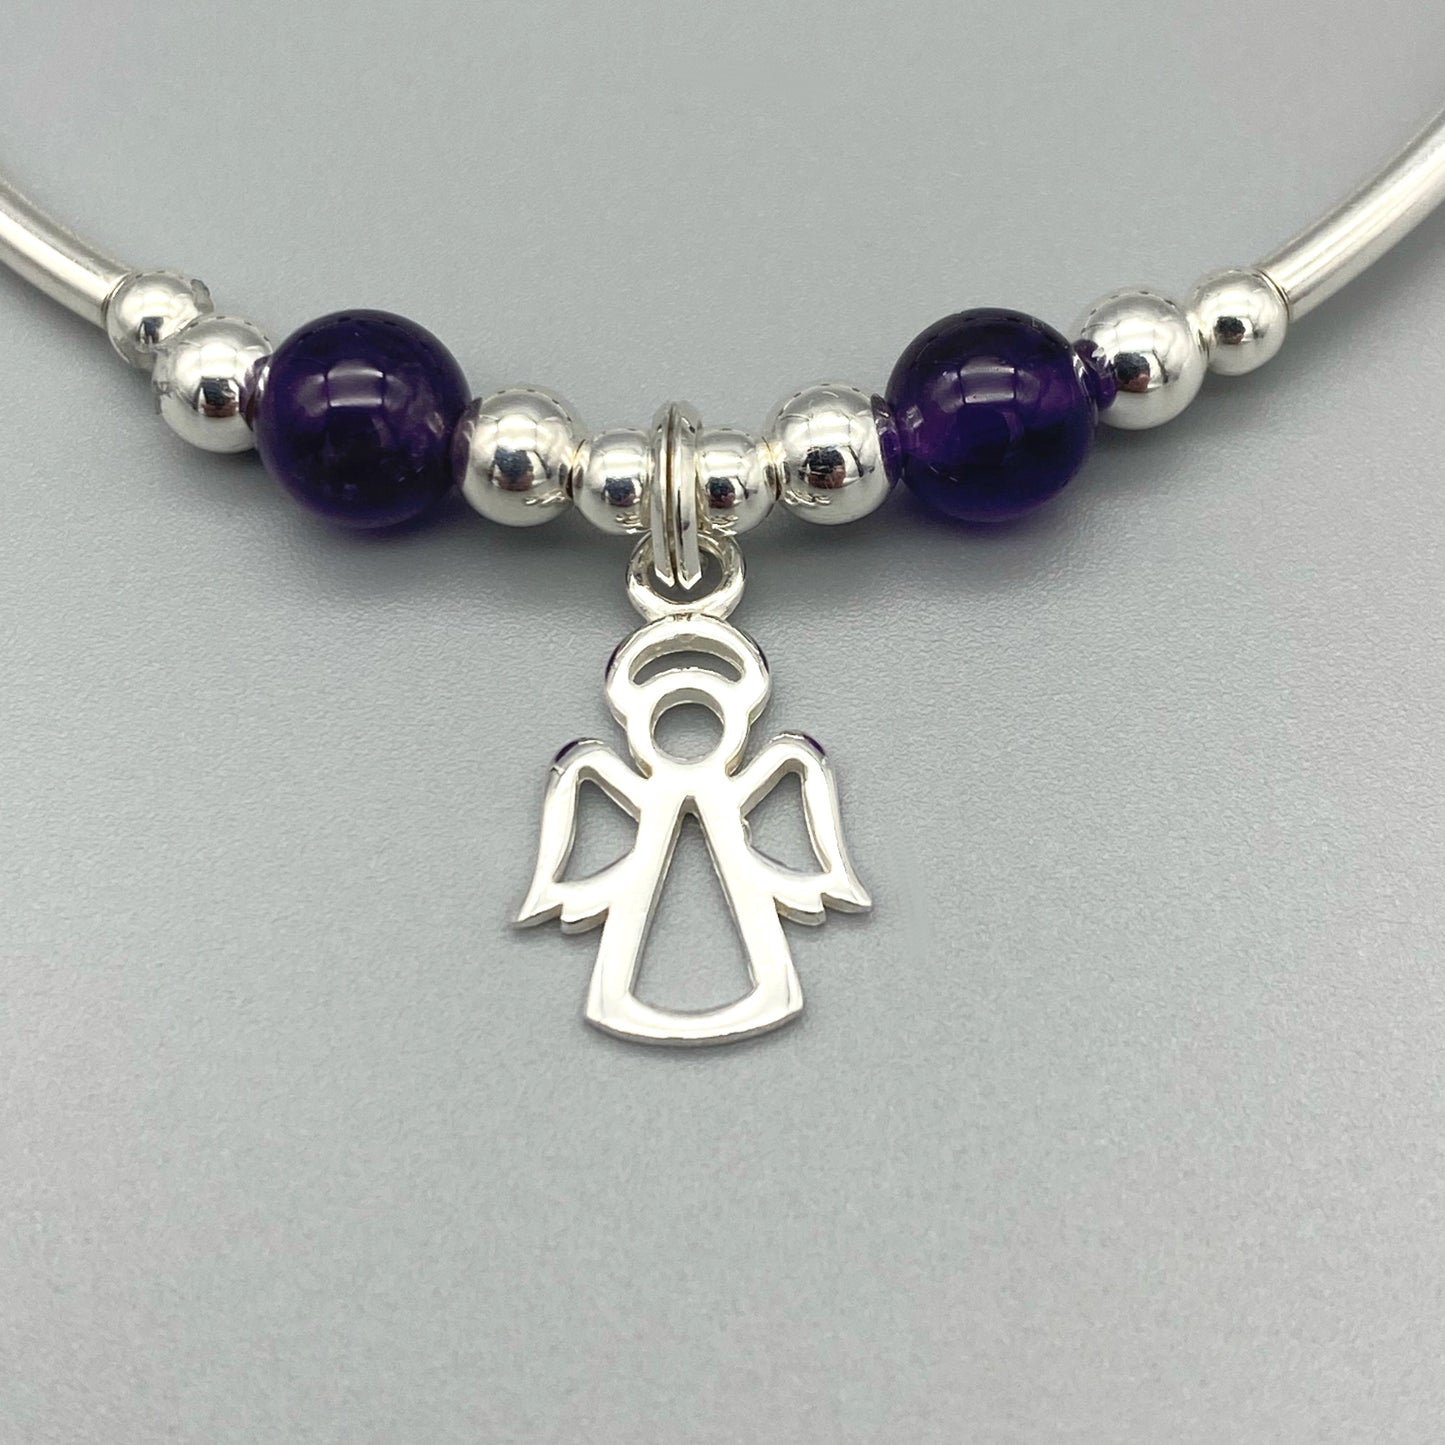 Closeup of Angel Charm Amethyst Healing Crystal Women's Sterling Silver Stacking Bracelet by My Silver Wish